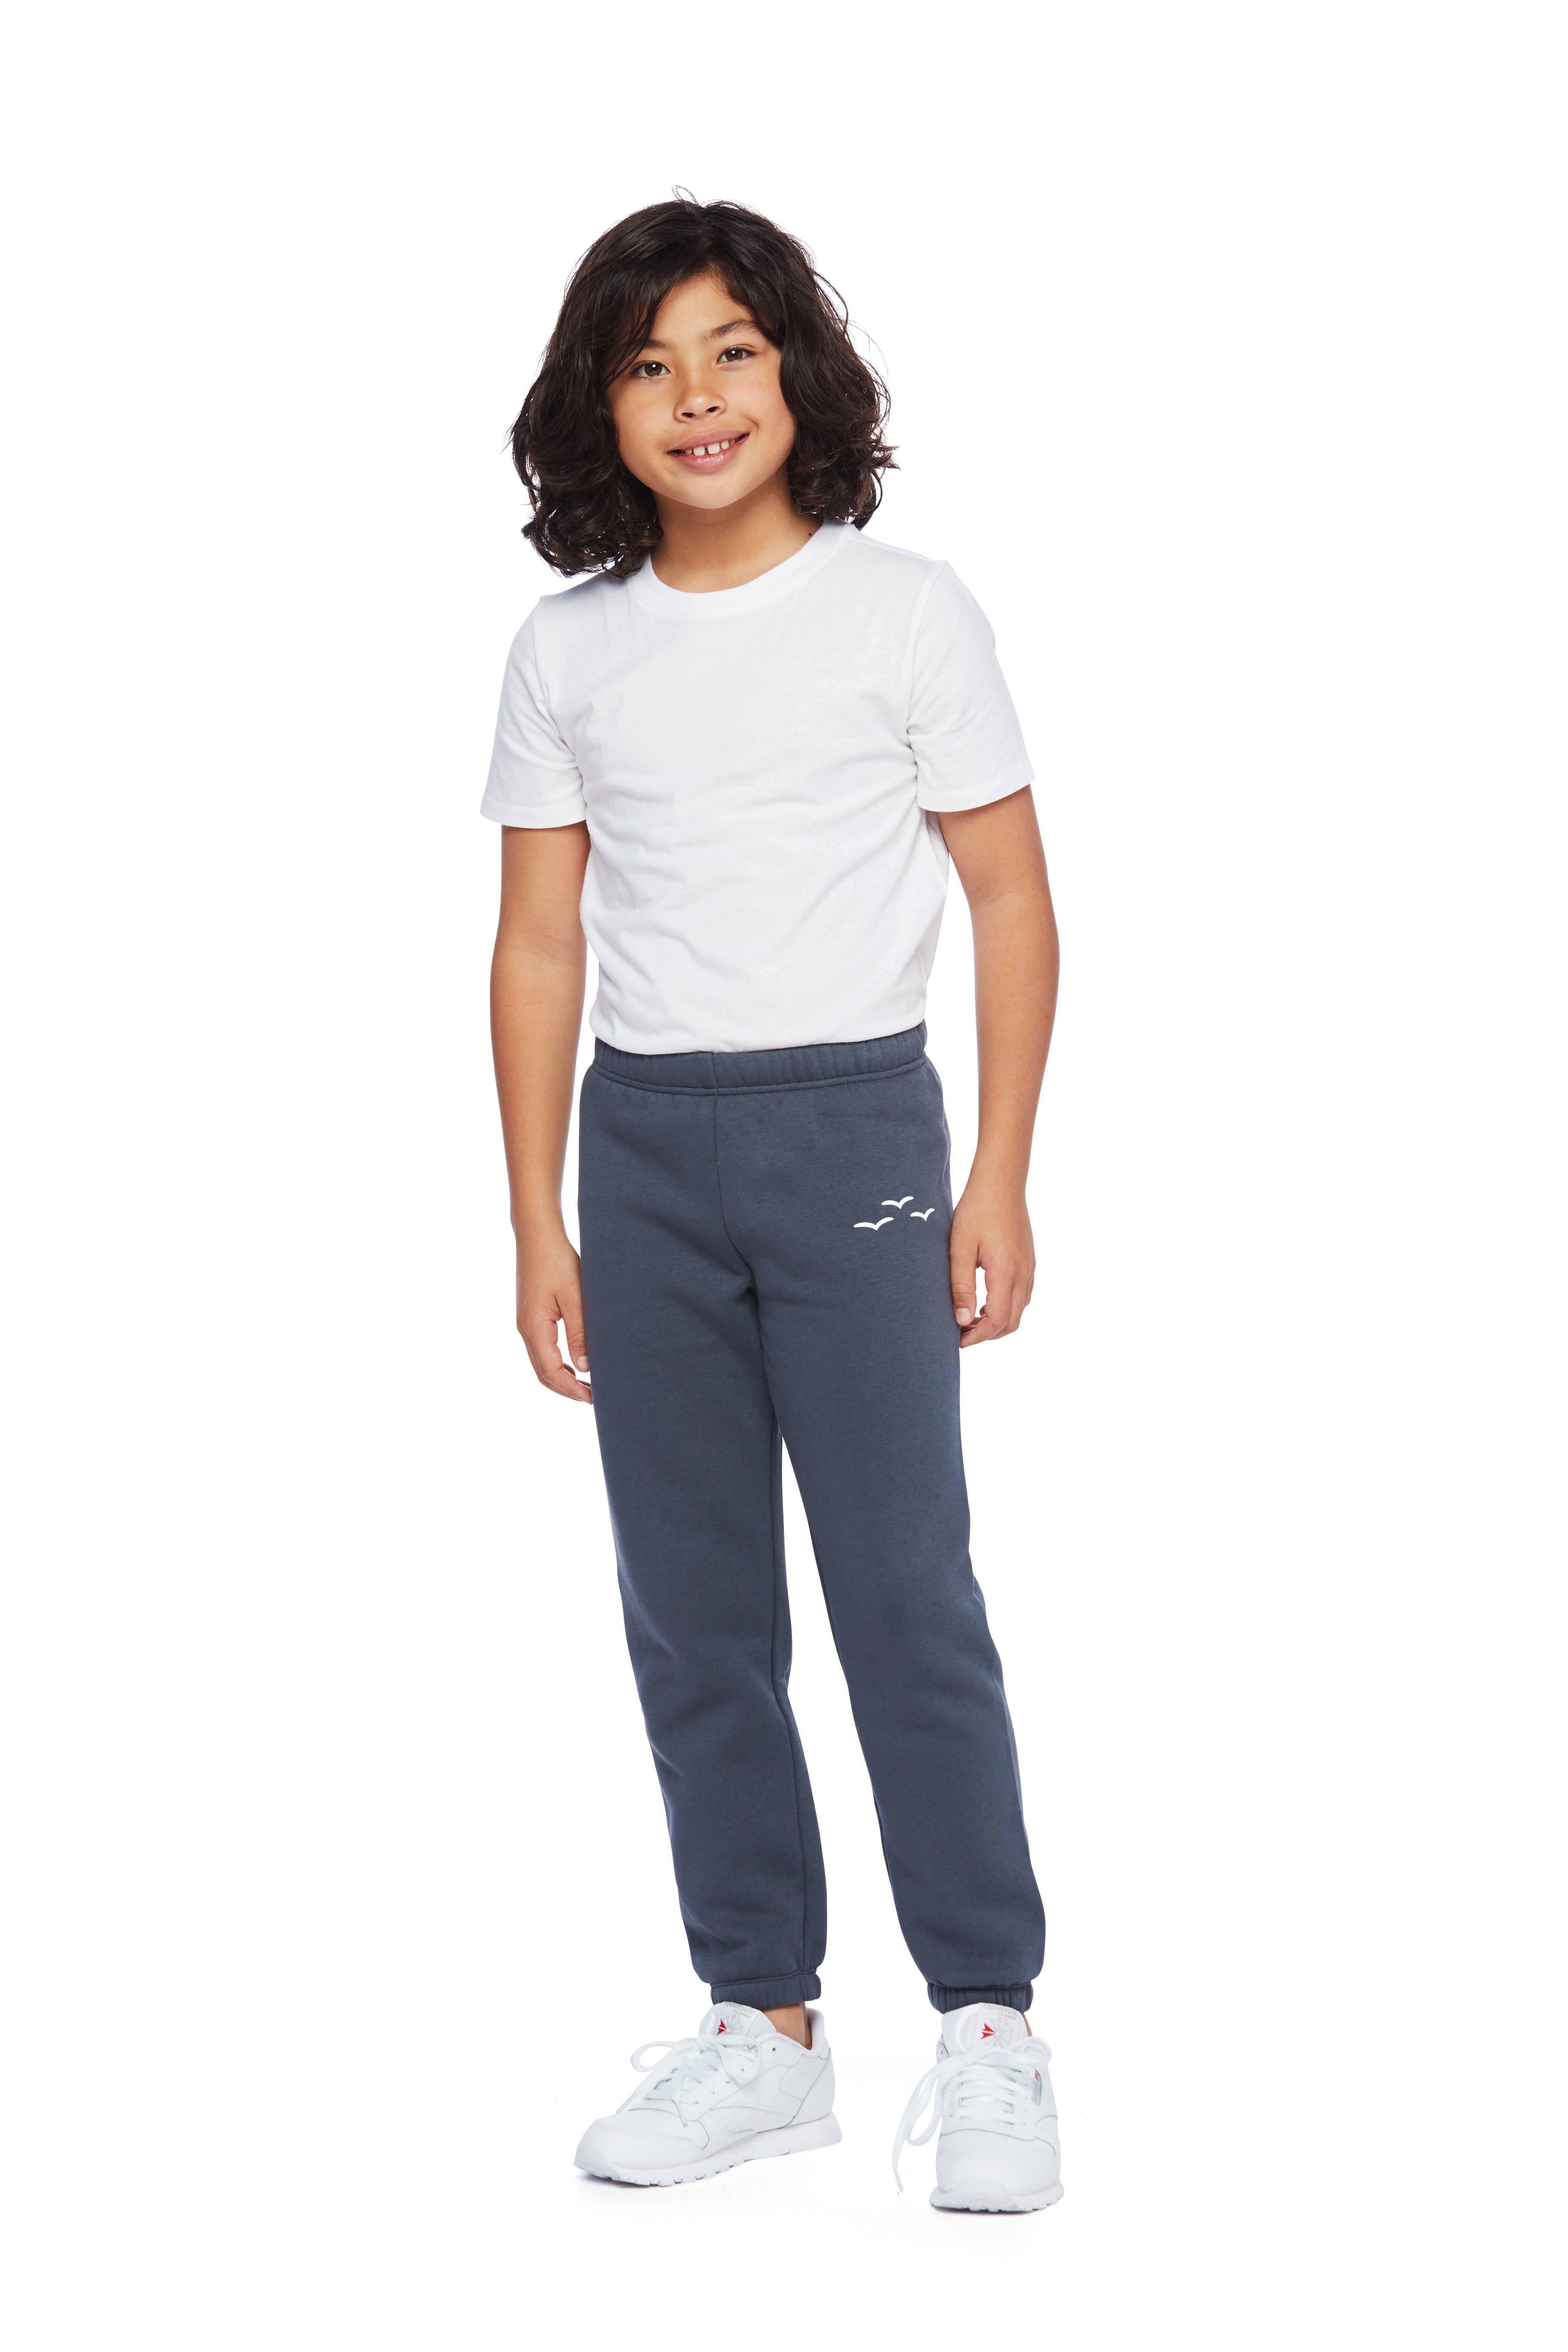 Niki Original kids sweatpants in navy wash from Lazypants - always a great buy at a reasonable price.